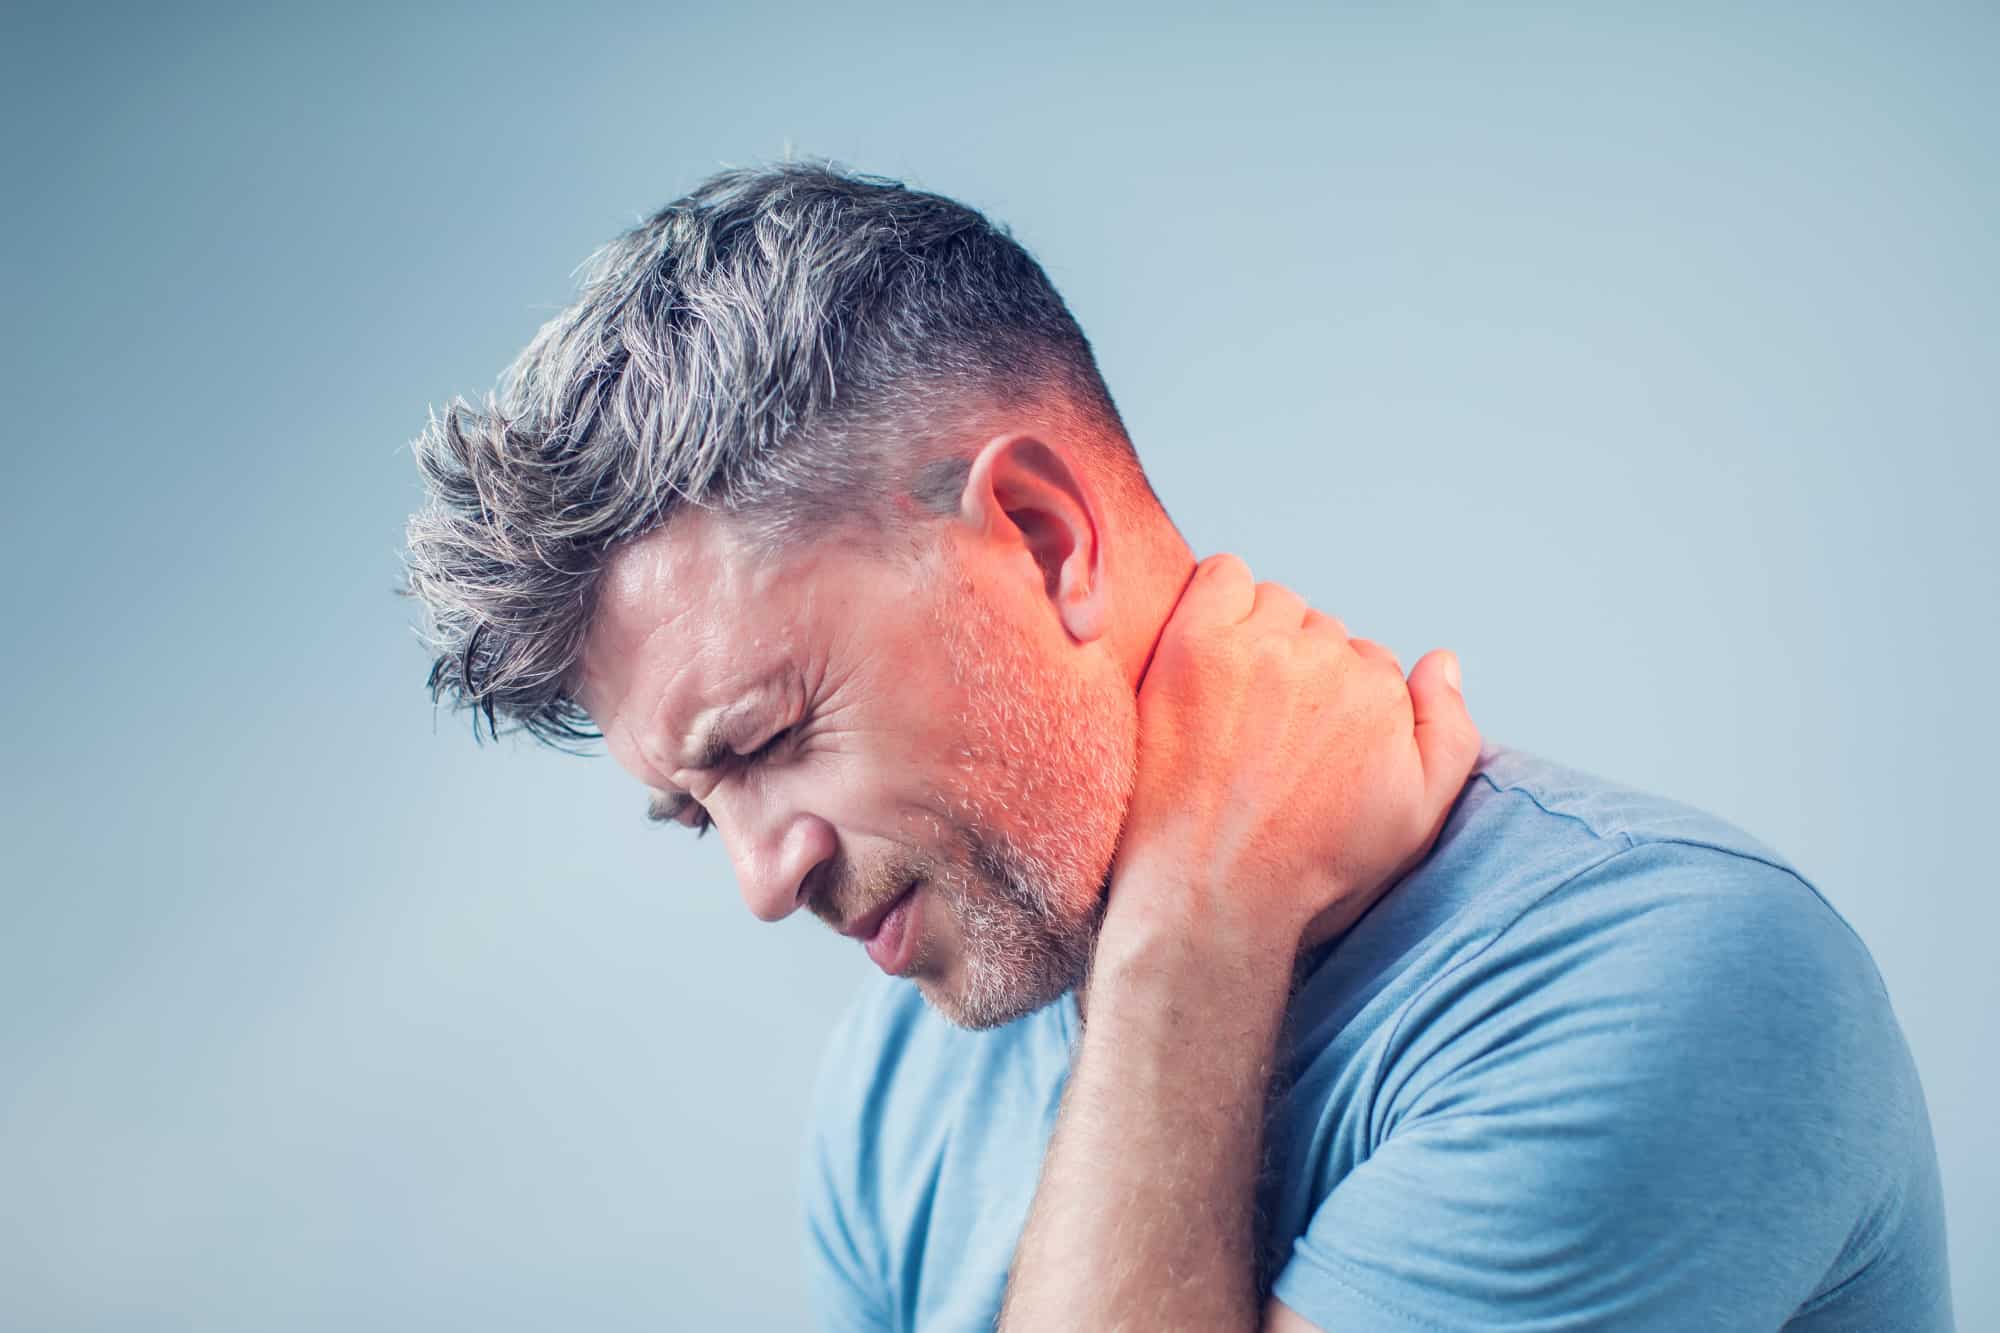 causes of neck pain